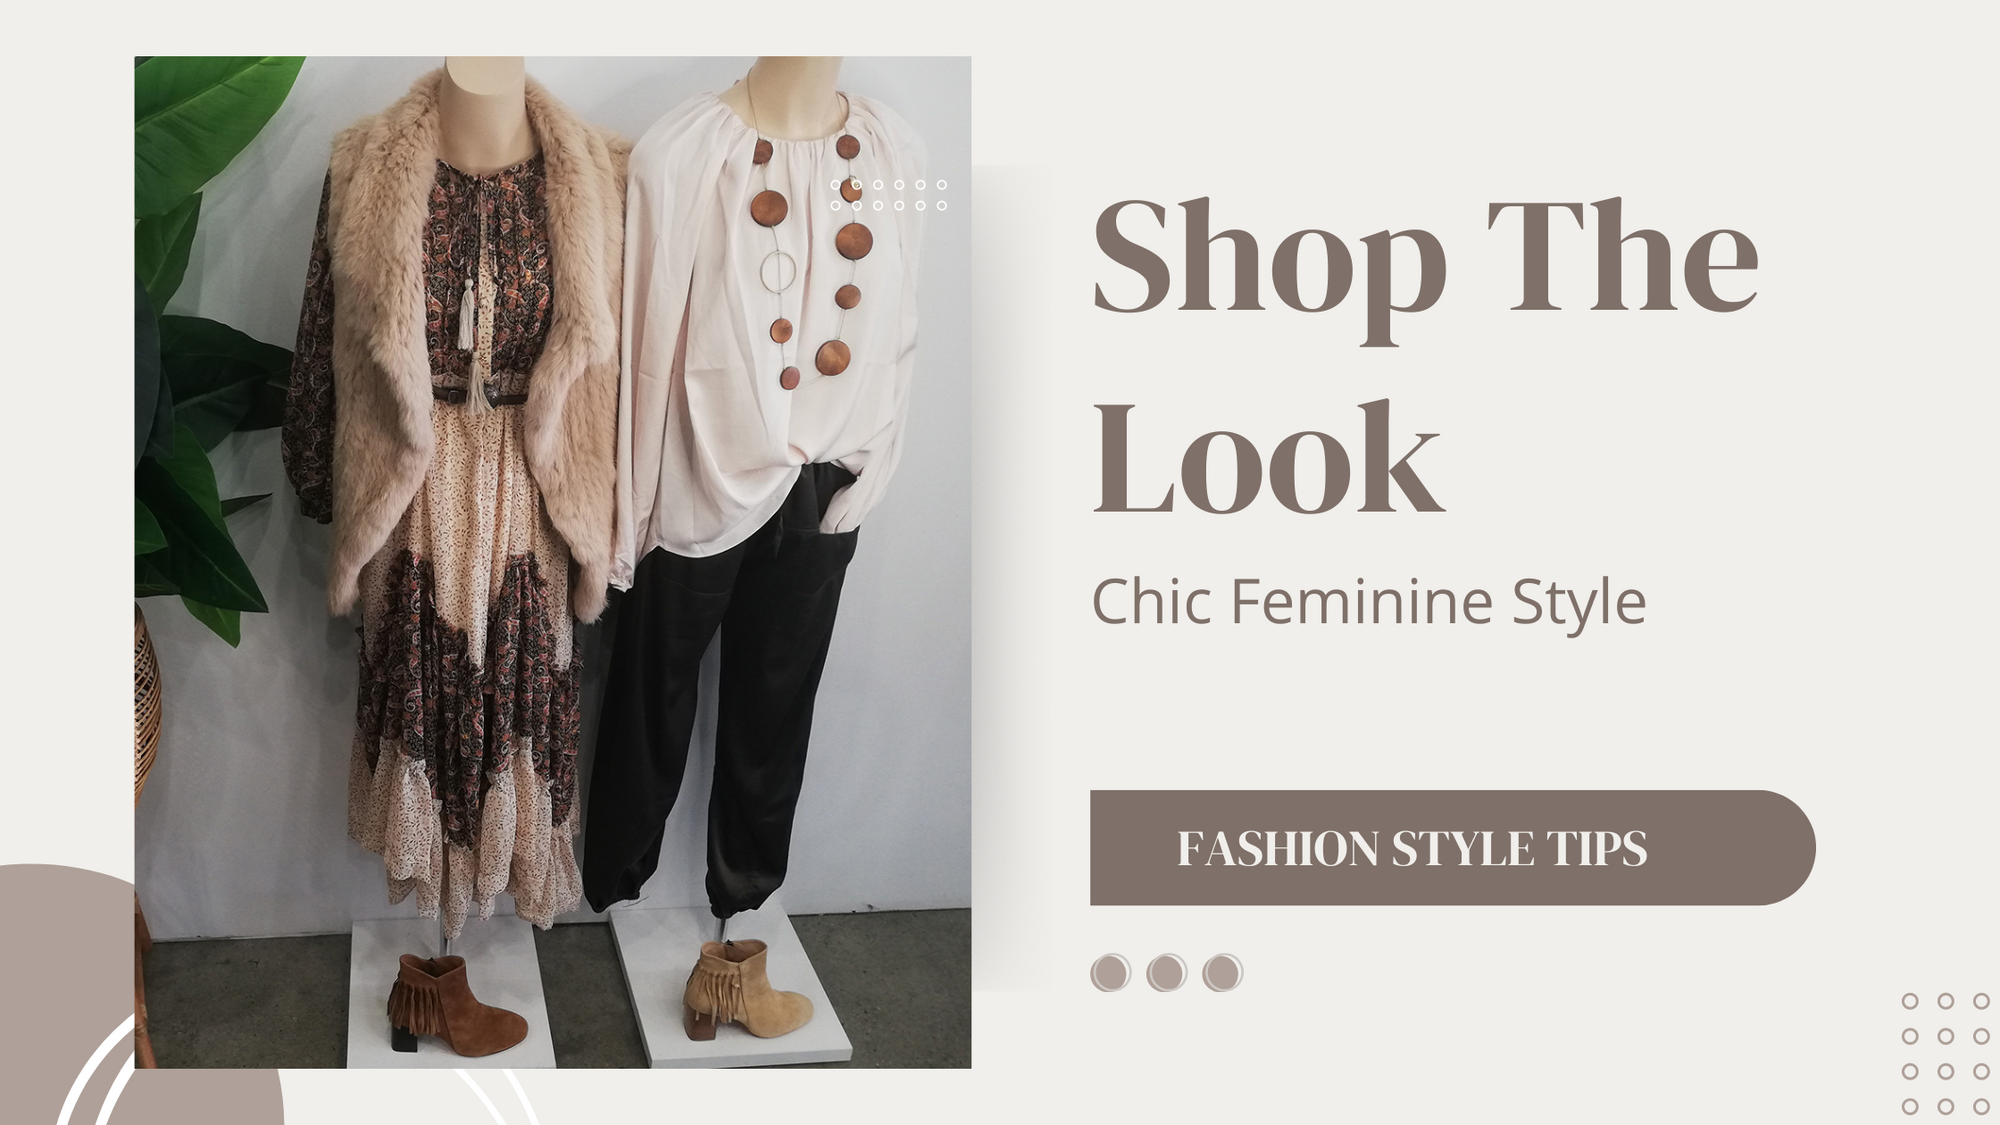 Shop the Look - Chic Feminine Style in Boho Dresses and Satin Coordinates at Kindred Spirit Boutique and Gift